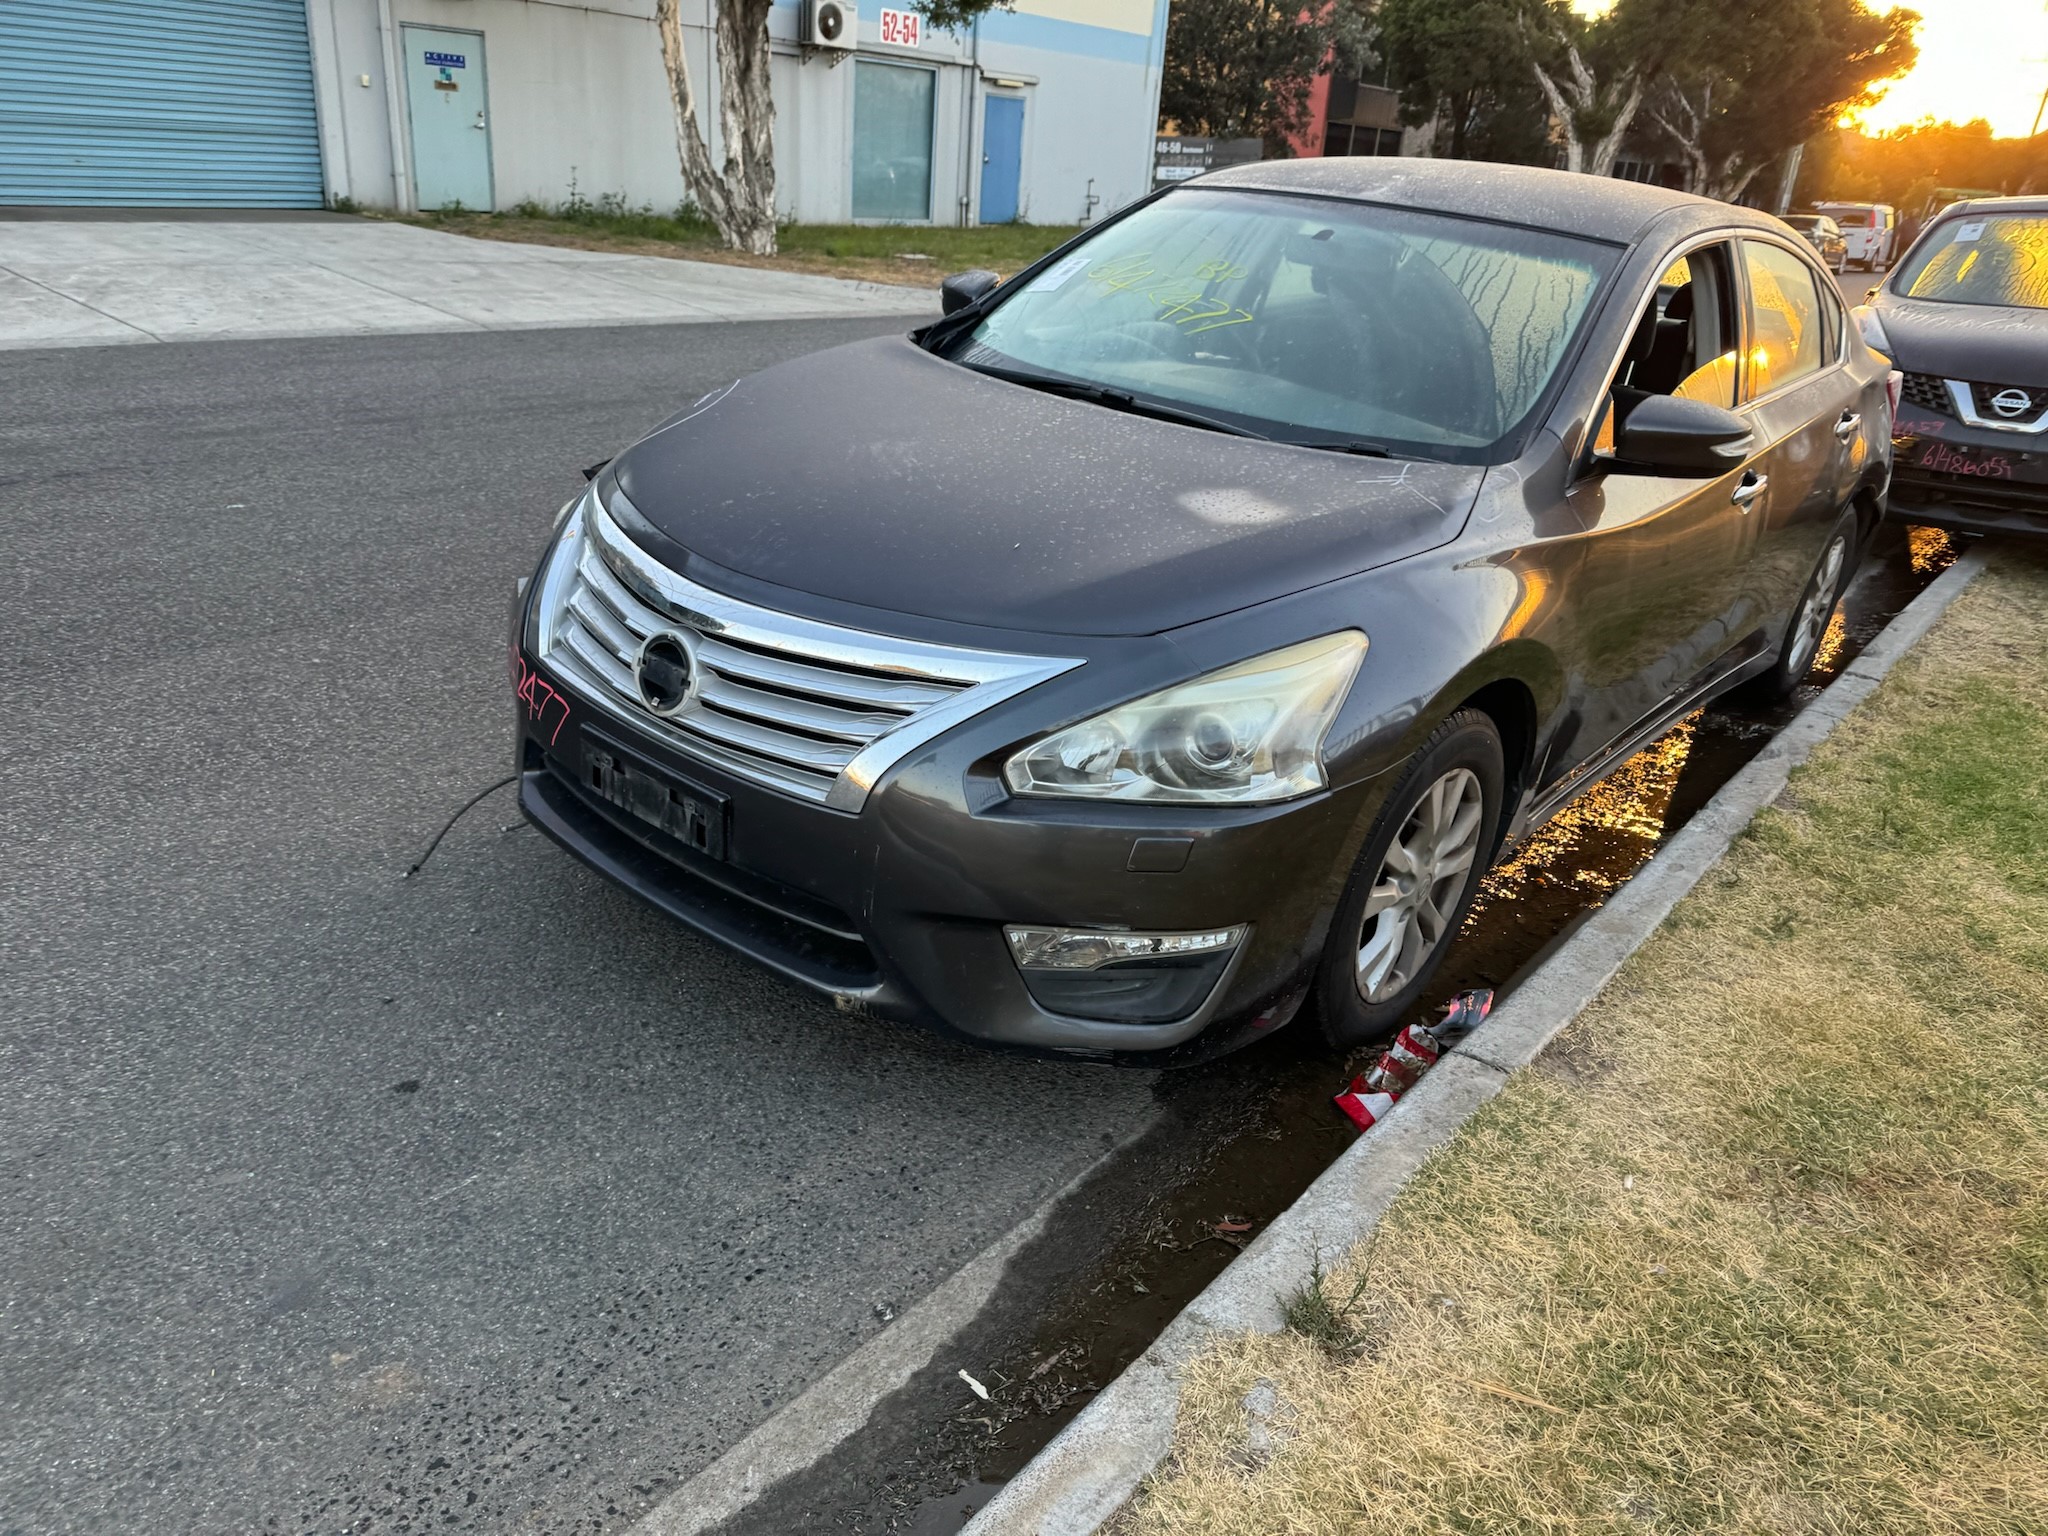 NISSAN ALTIMA L33 ST 2015 WRECKING / PARTS ONLY